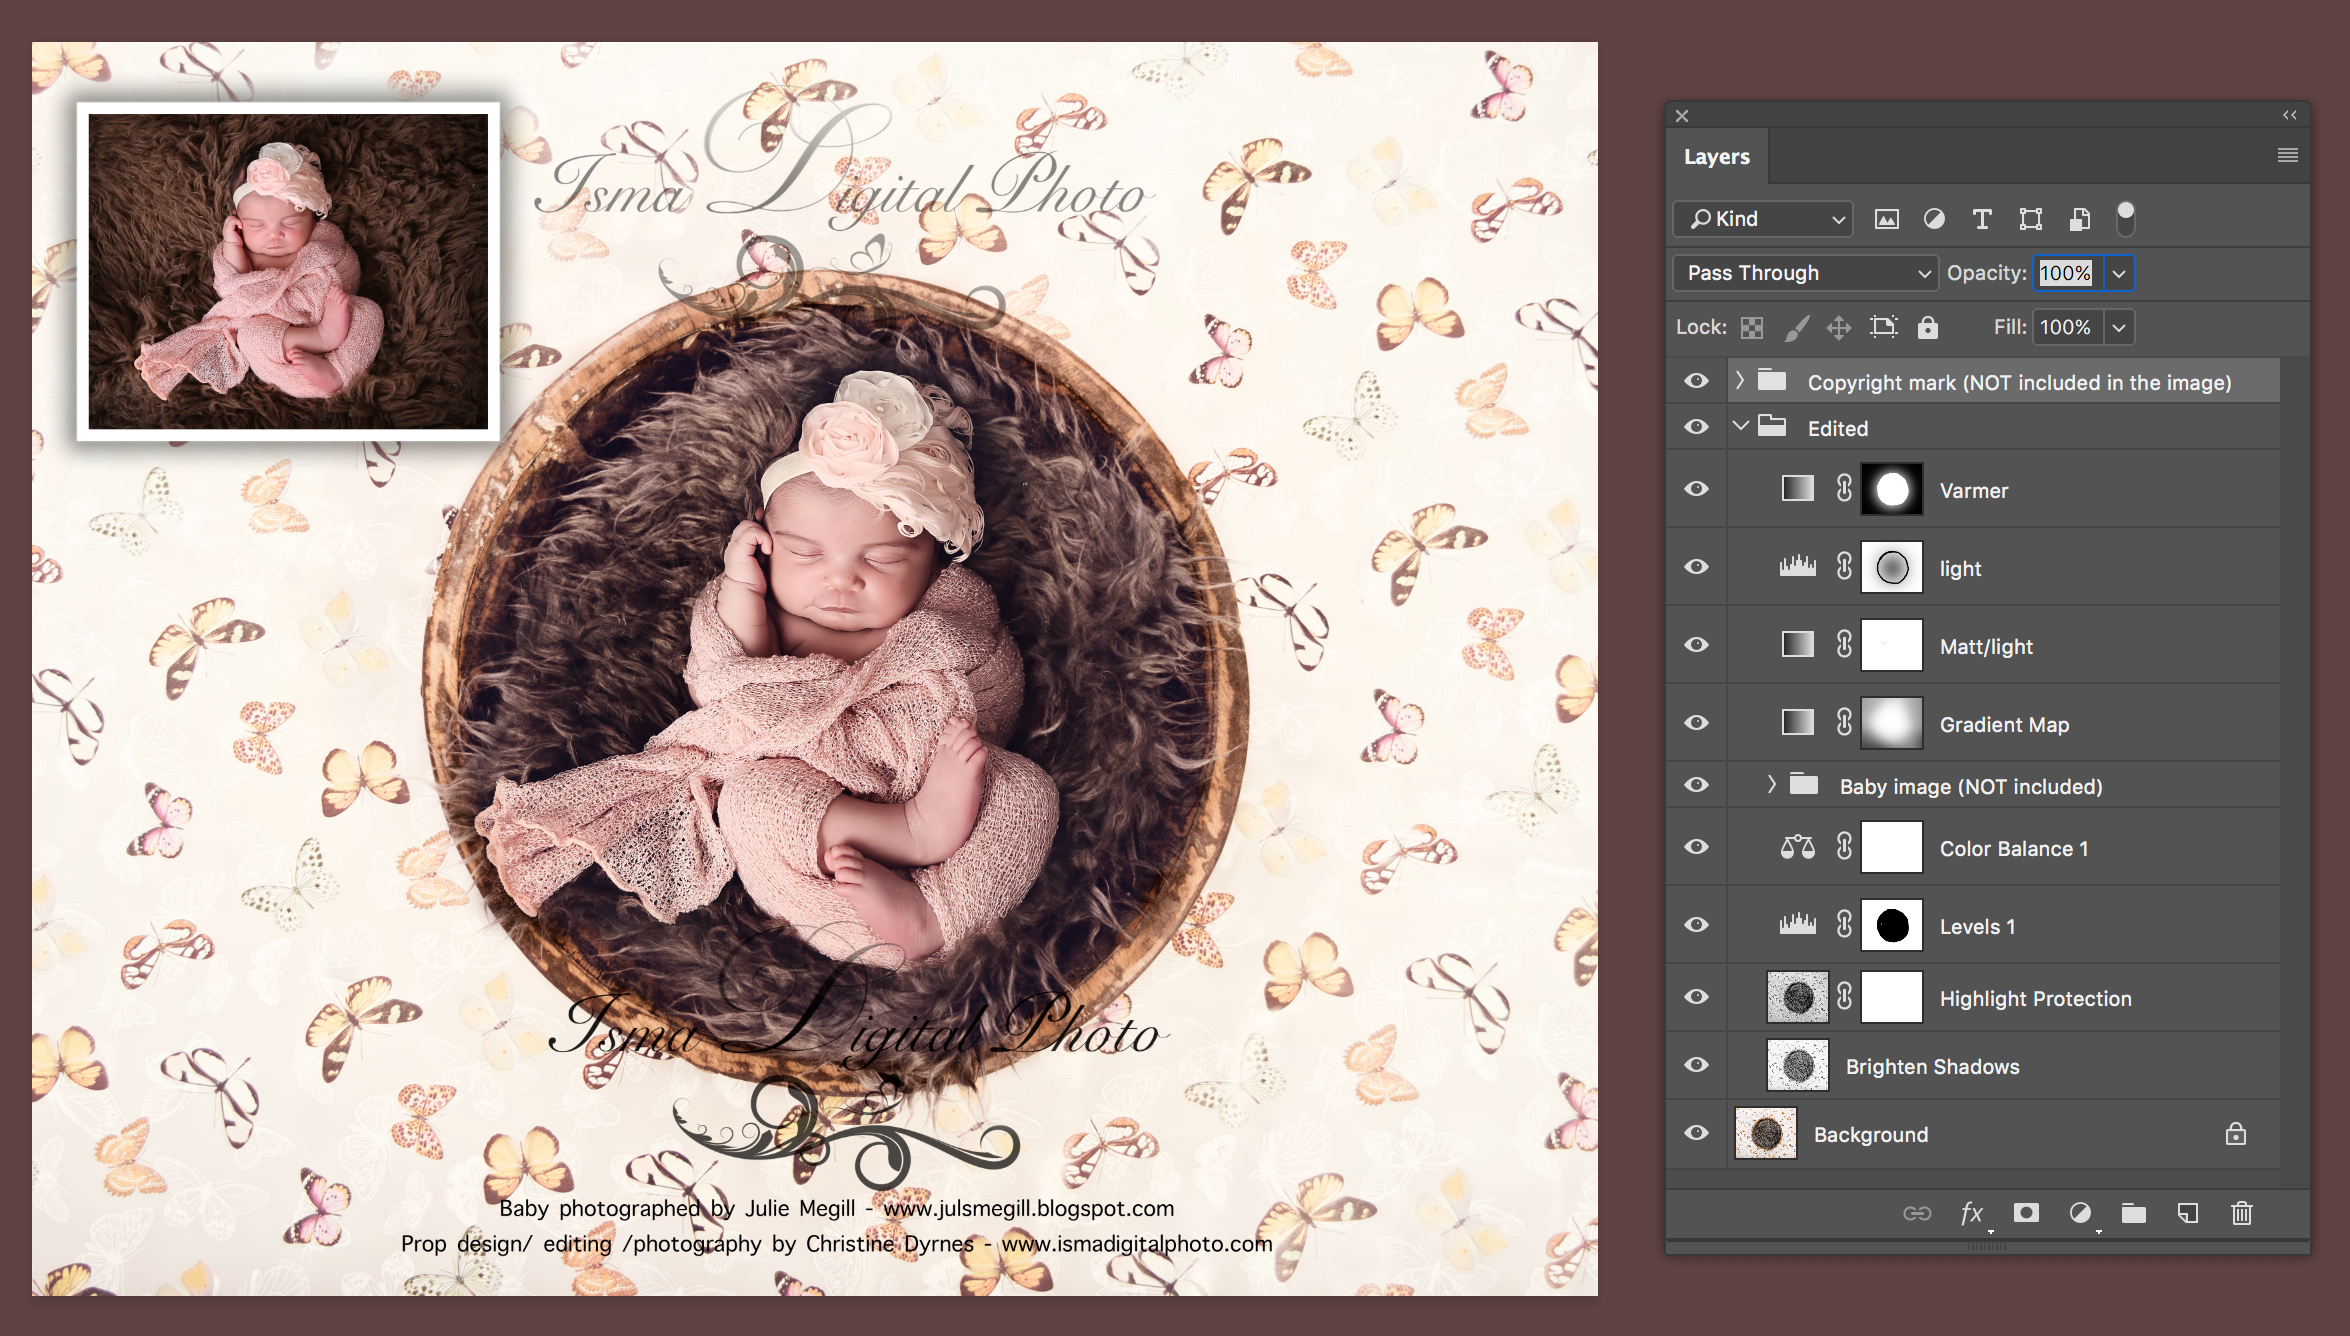 Digital Backdrop /Props for Newborn /baby photography - High resolution digital backdrop /background - Two JPG and one PSD file with layers